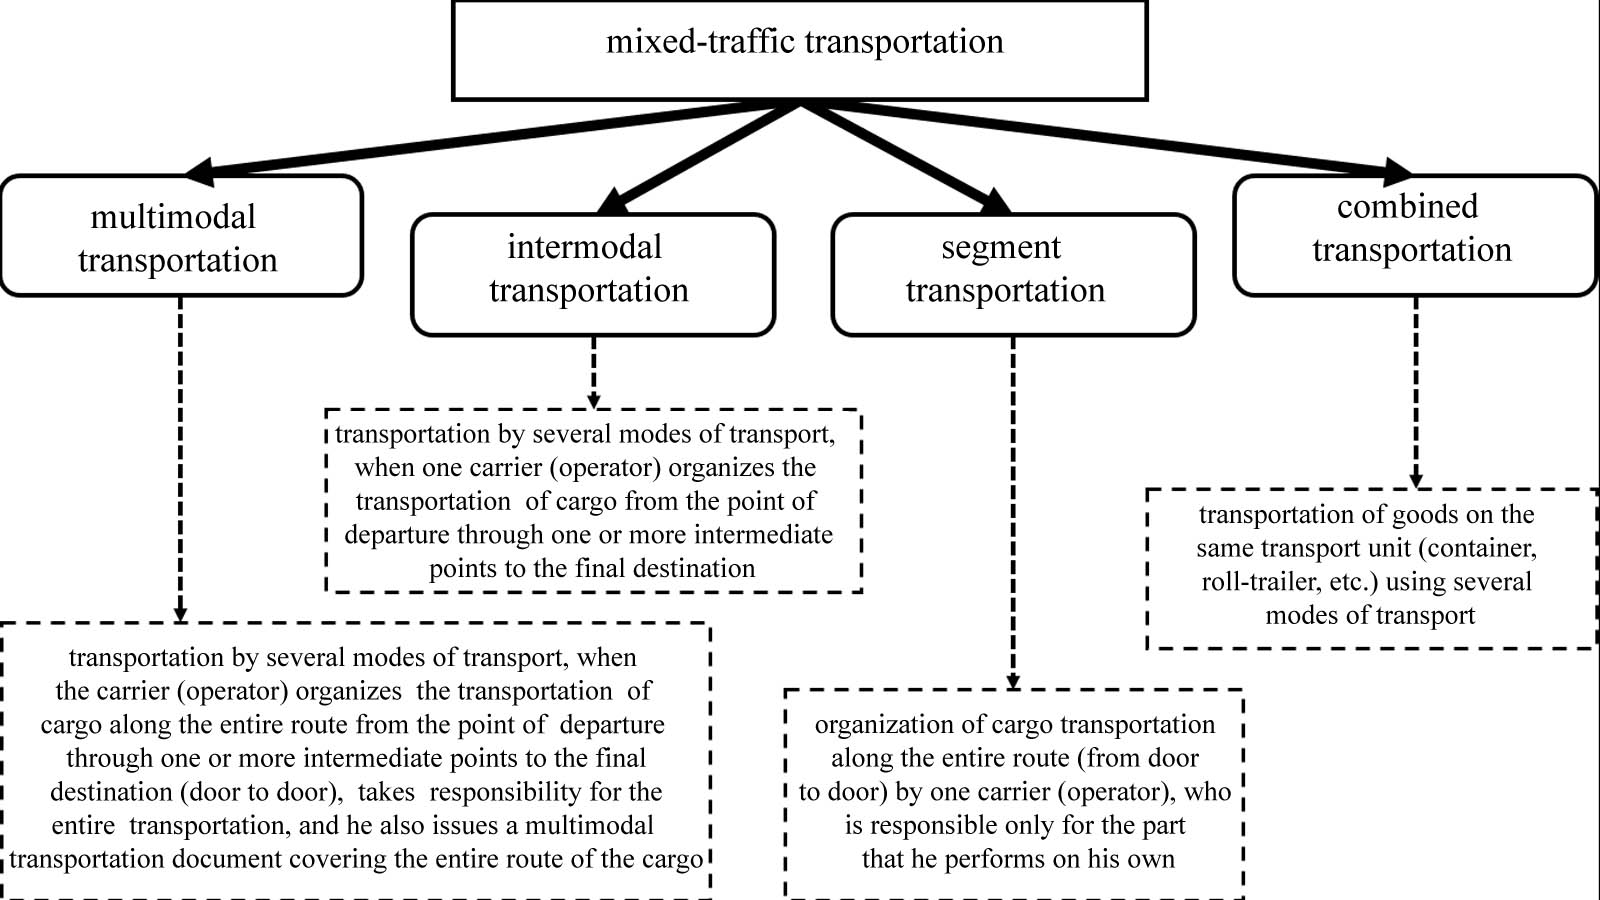 Classification of multimodal transport in accordance with UNCTAD